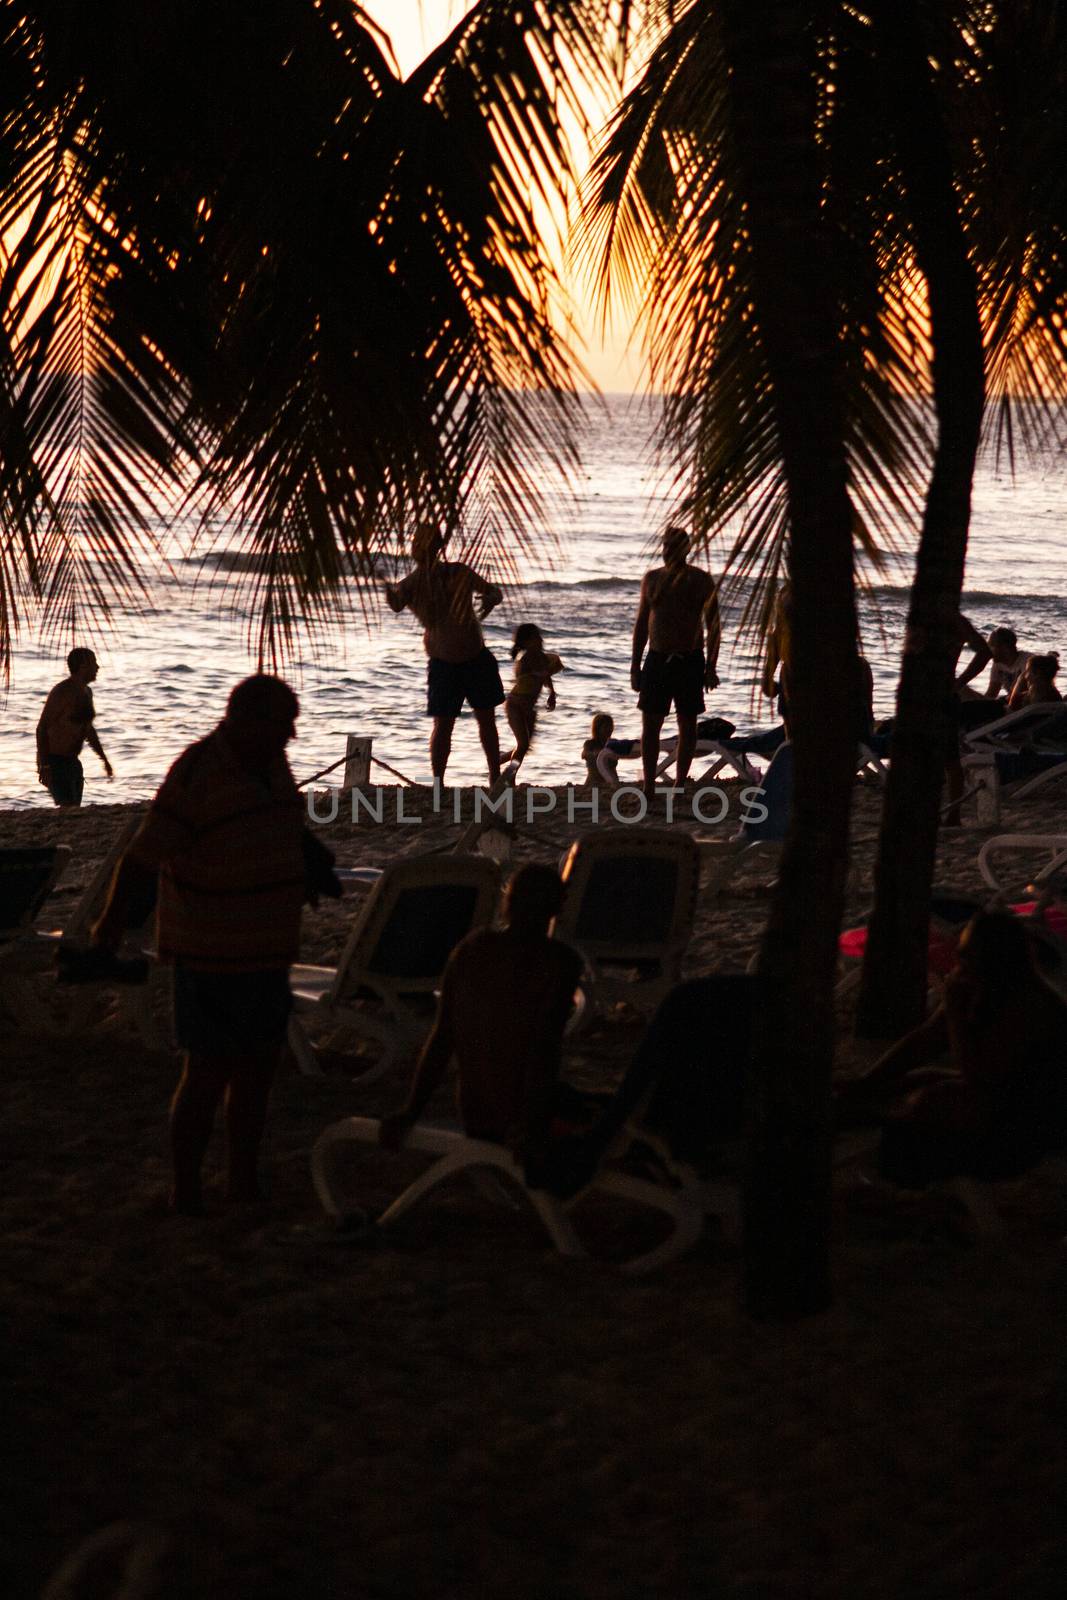 BAYAHIBE, DOMINICAN REPUBLIC 13 DECEMBER 2019: Silhouette of people on the beach at sunset